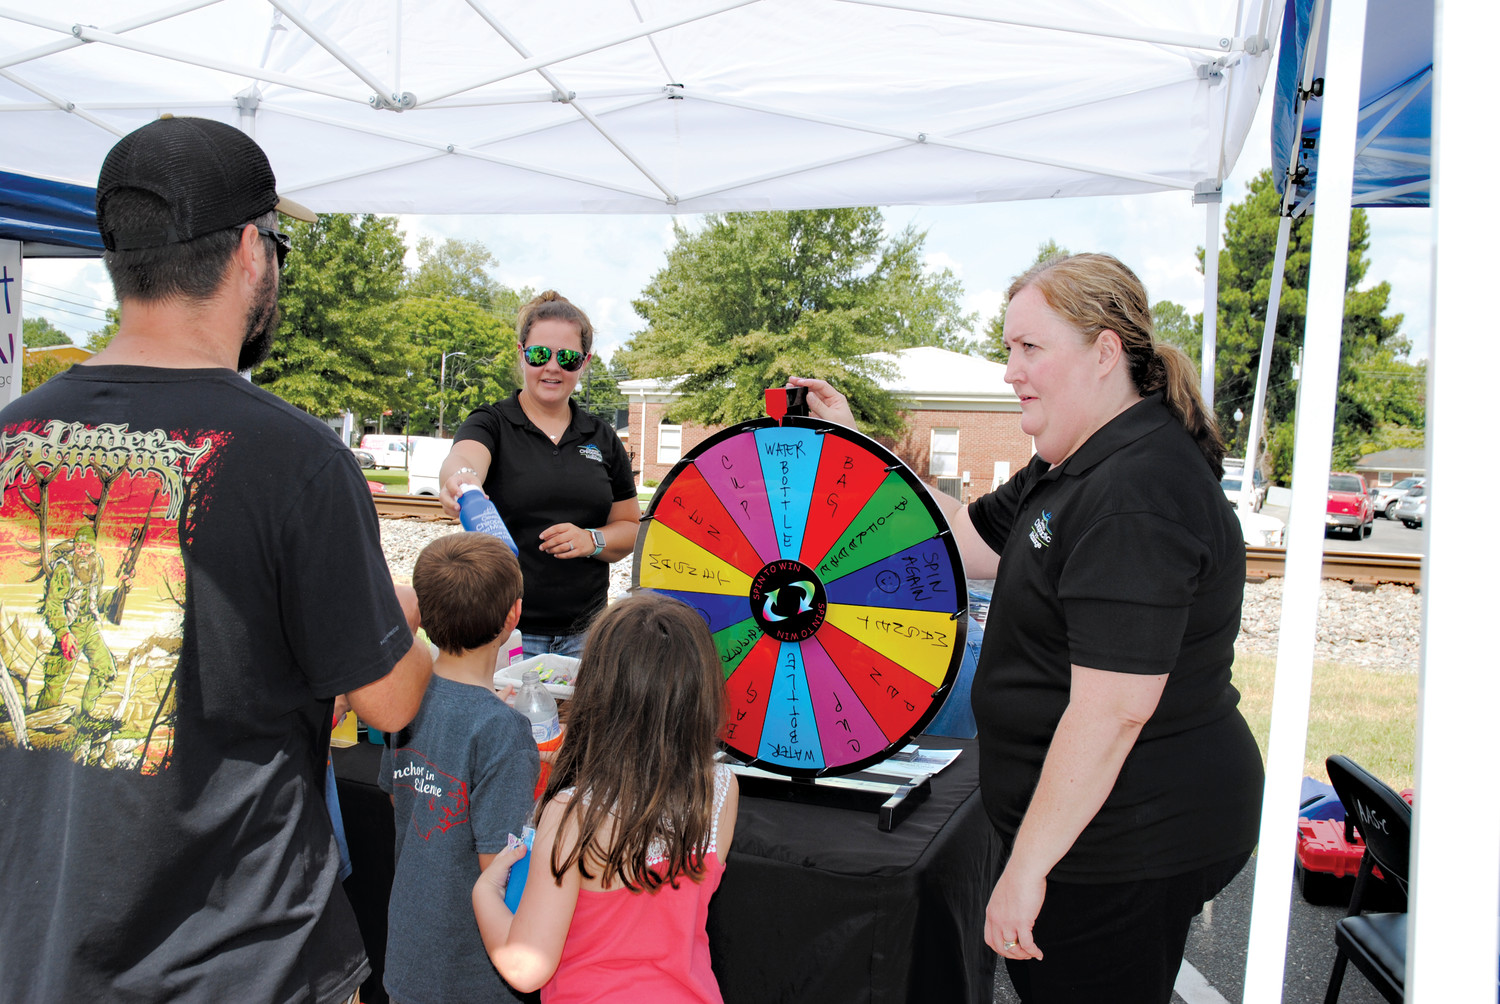 Businesses and organizations lined both sides of Railroad Avenue in Four Oaks Saturday for a Business Expo, part of the annual Acorn Festival. Here, Dr. Michelle Elliott, right, and Jamie Bell, left, of Cleveland Chiropractic and Massage watches as Jared Petterson of Four Oaks and his kids, Grayson, 6, and Reece, 9, spin the wheel for prizes.